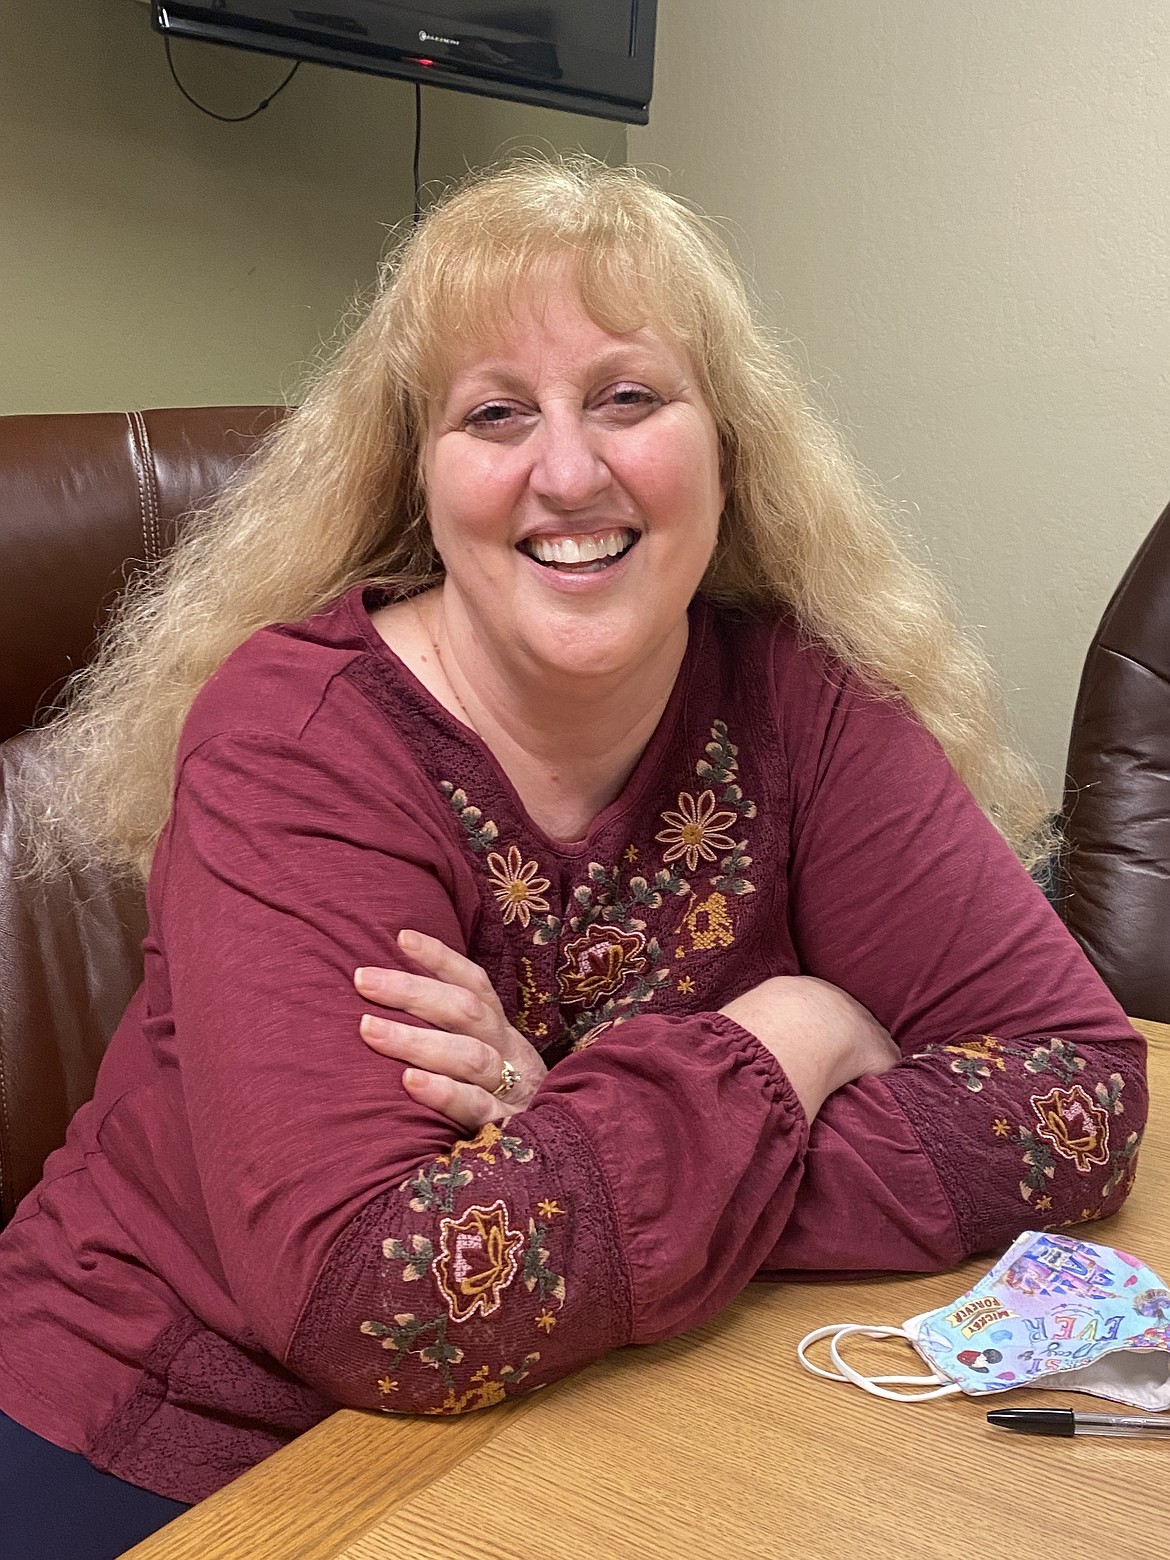 Terri Johnson, Vice President of Tesh, has been with the organization for 23 years. "I fell in love with the clients and the staff, they're just amazing," Johnson said. "You can't help but fall in love with these guys."